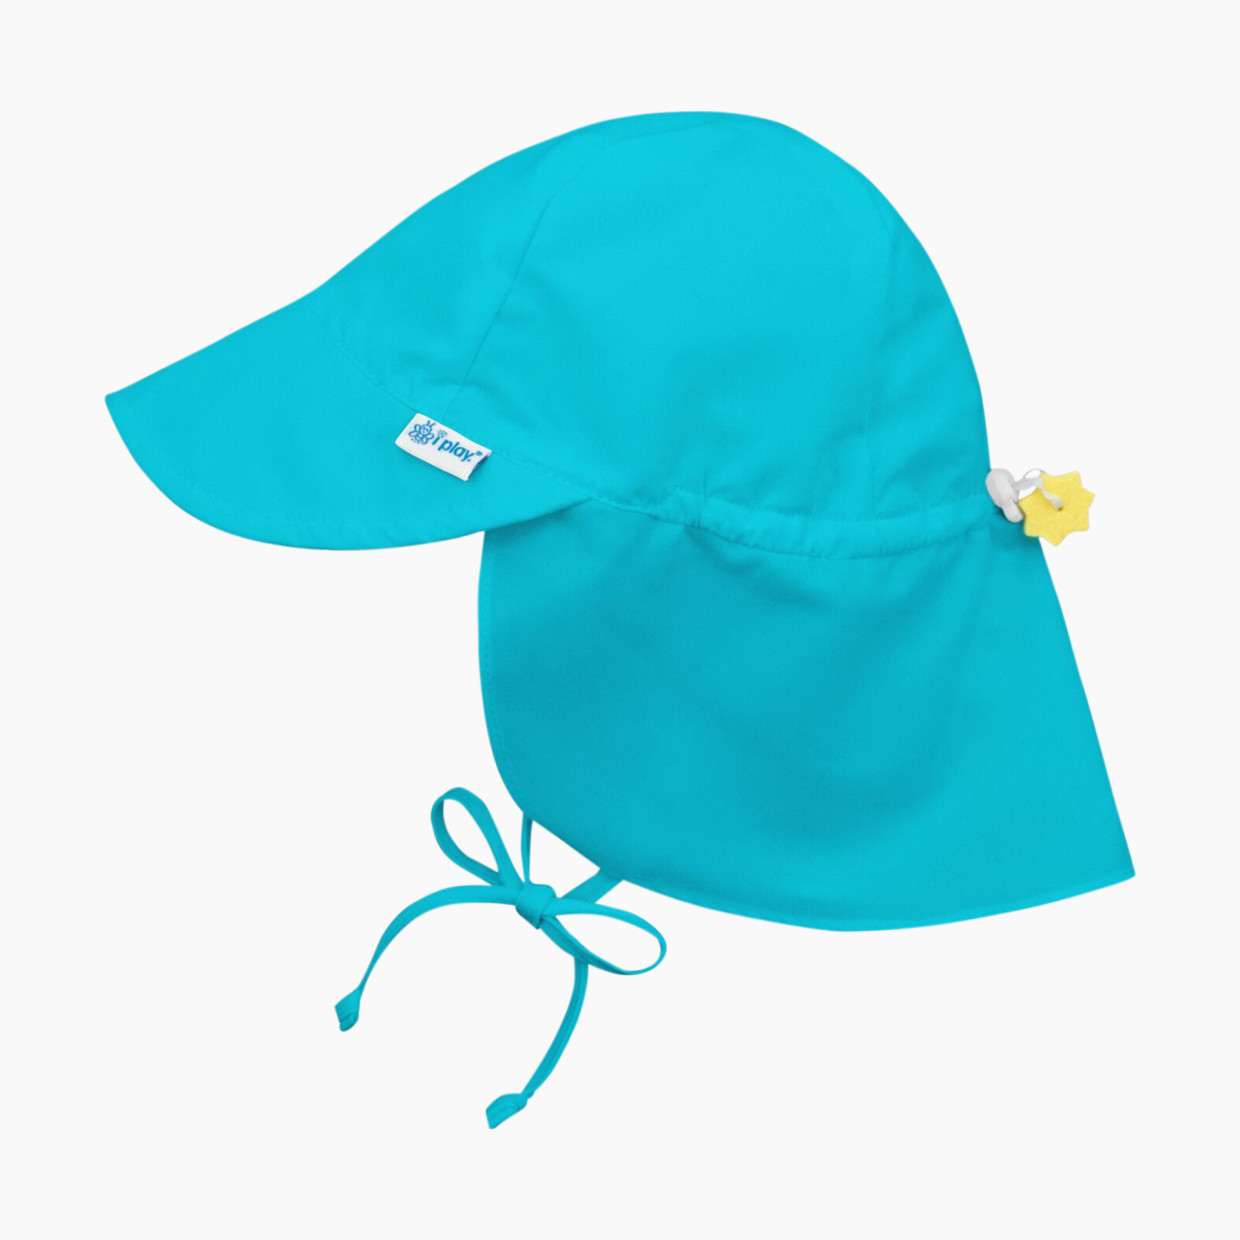 GREEN SPROUTS Flap Sun Protection Hat - Aqua, 0-6 Months.